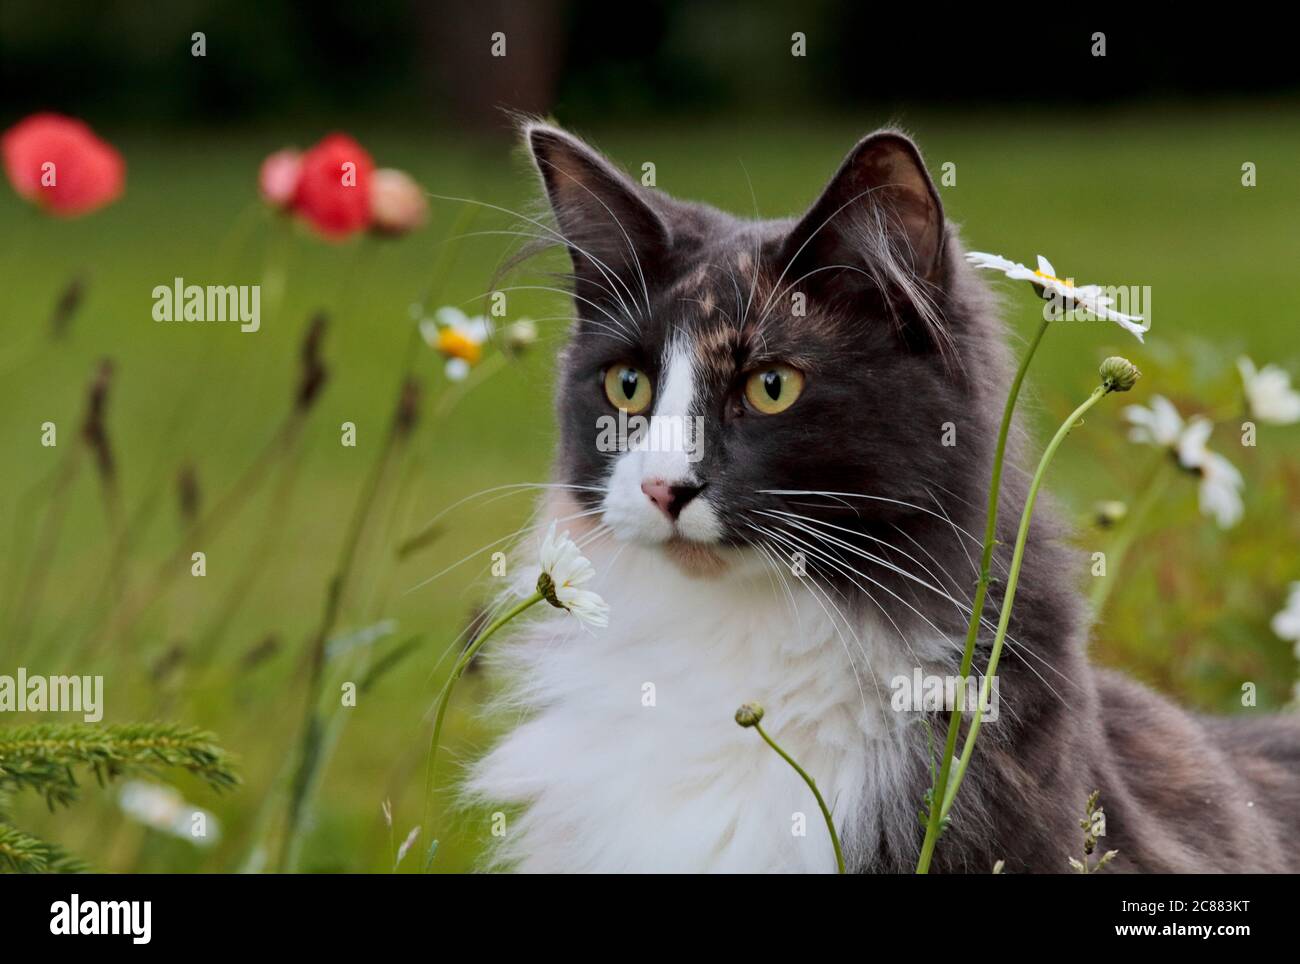 Norwegian forest cat with alert expression sitting among garden flowers in summertime Stock Photo